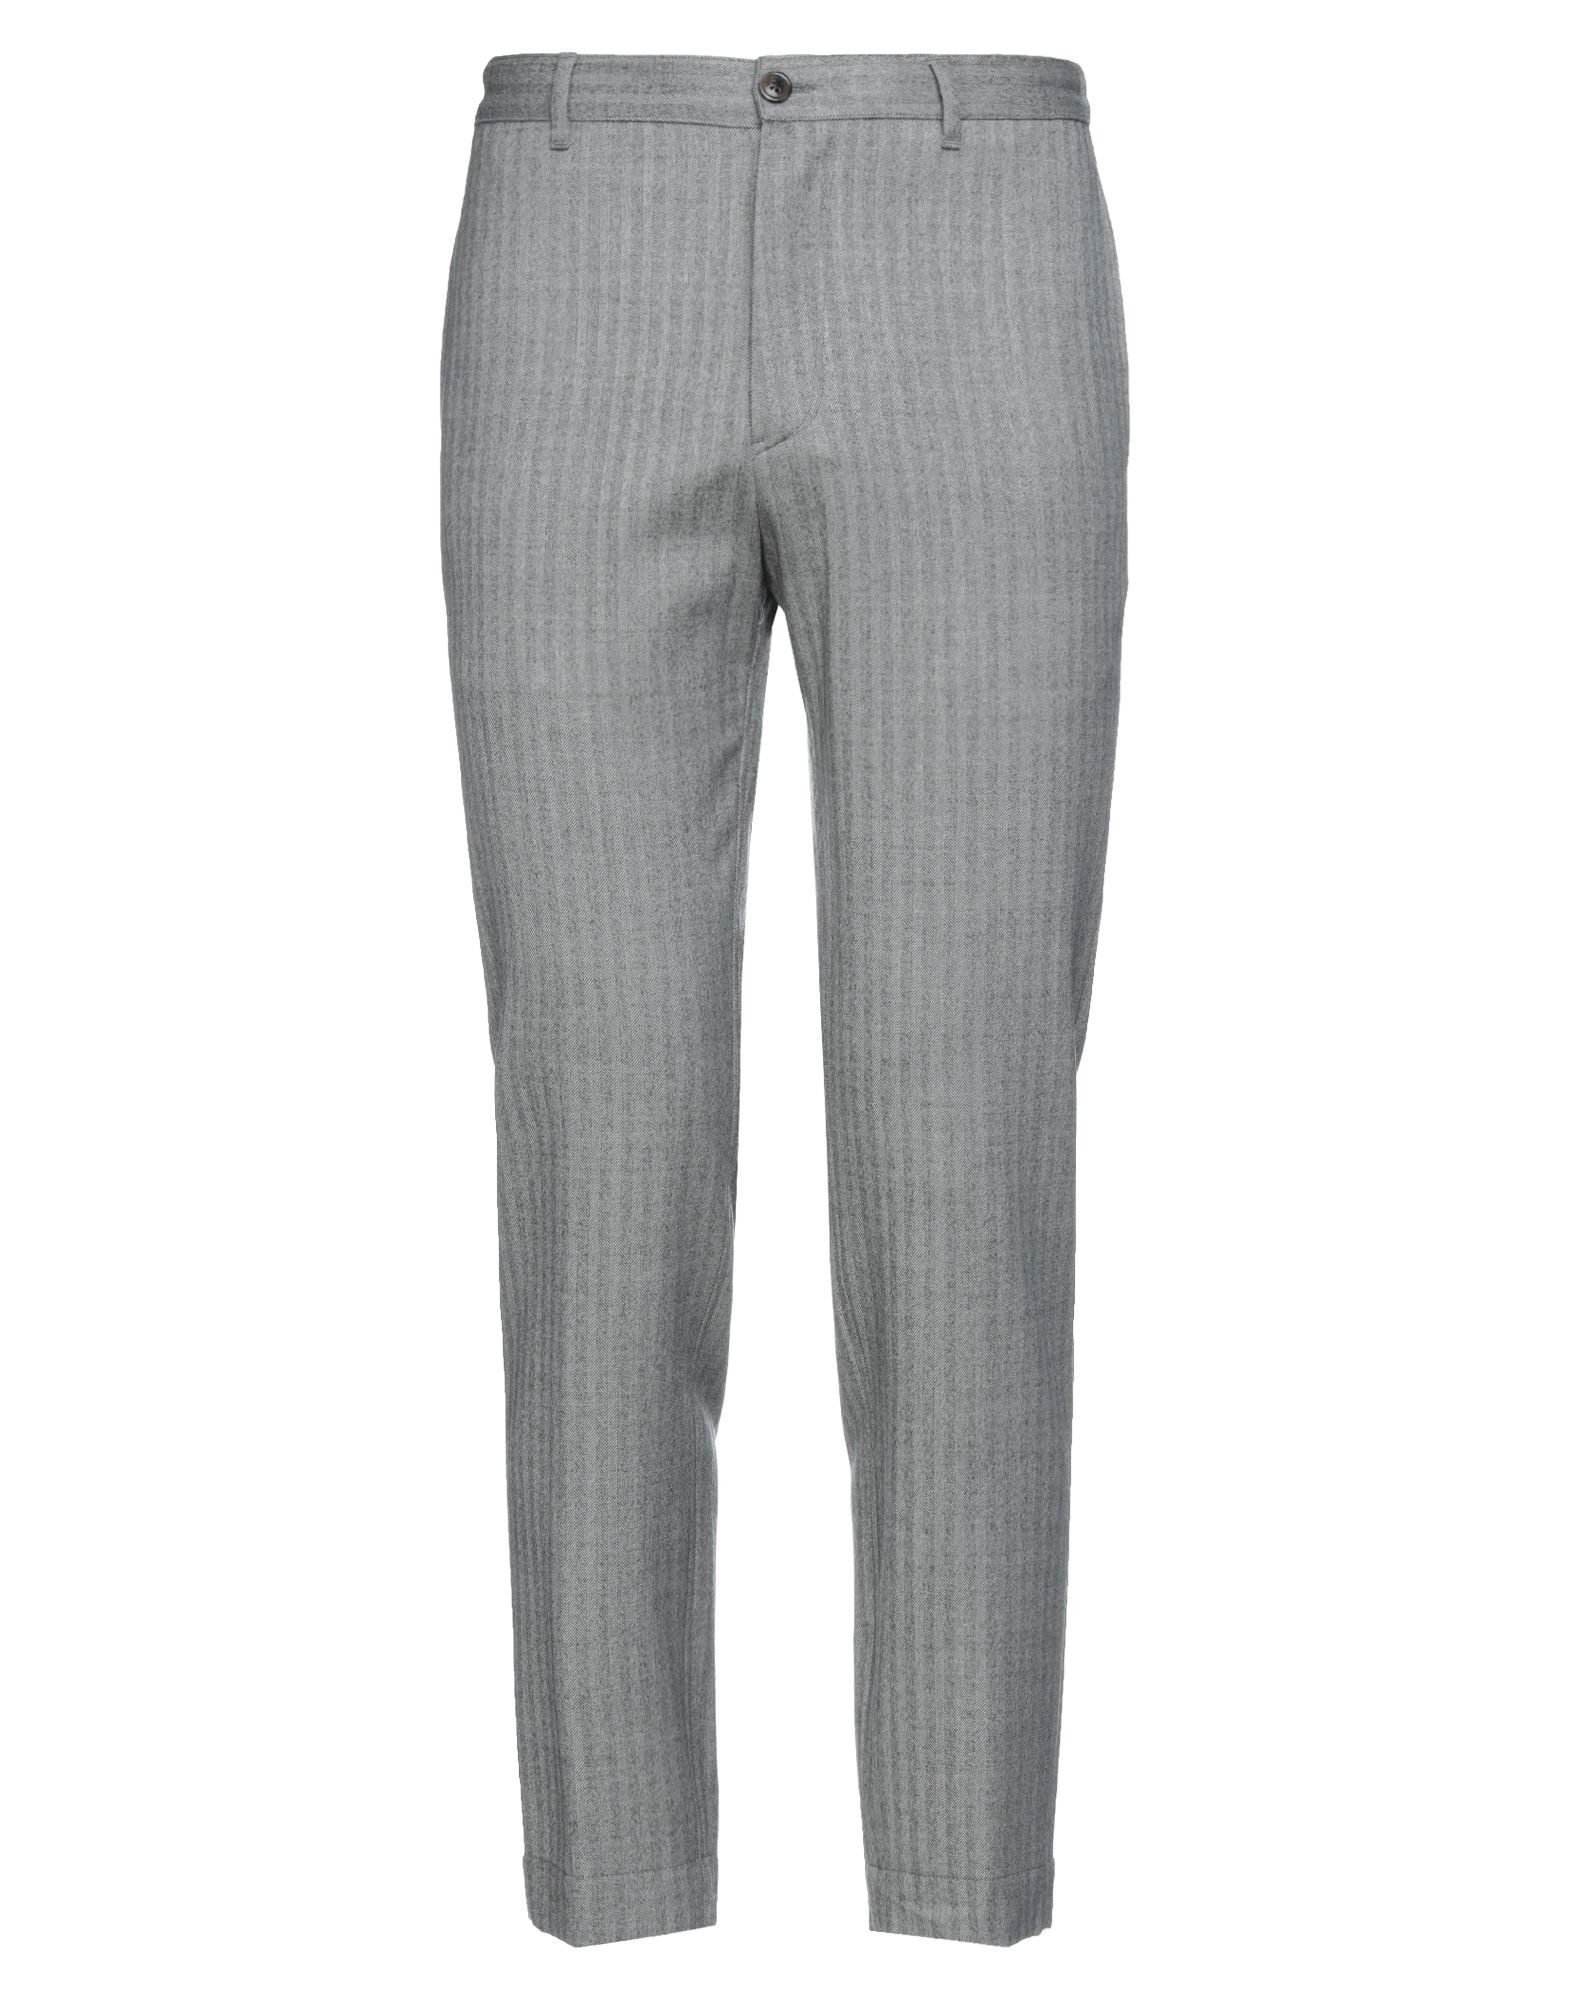 Mauro Grifoni Pants In Light Grey